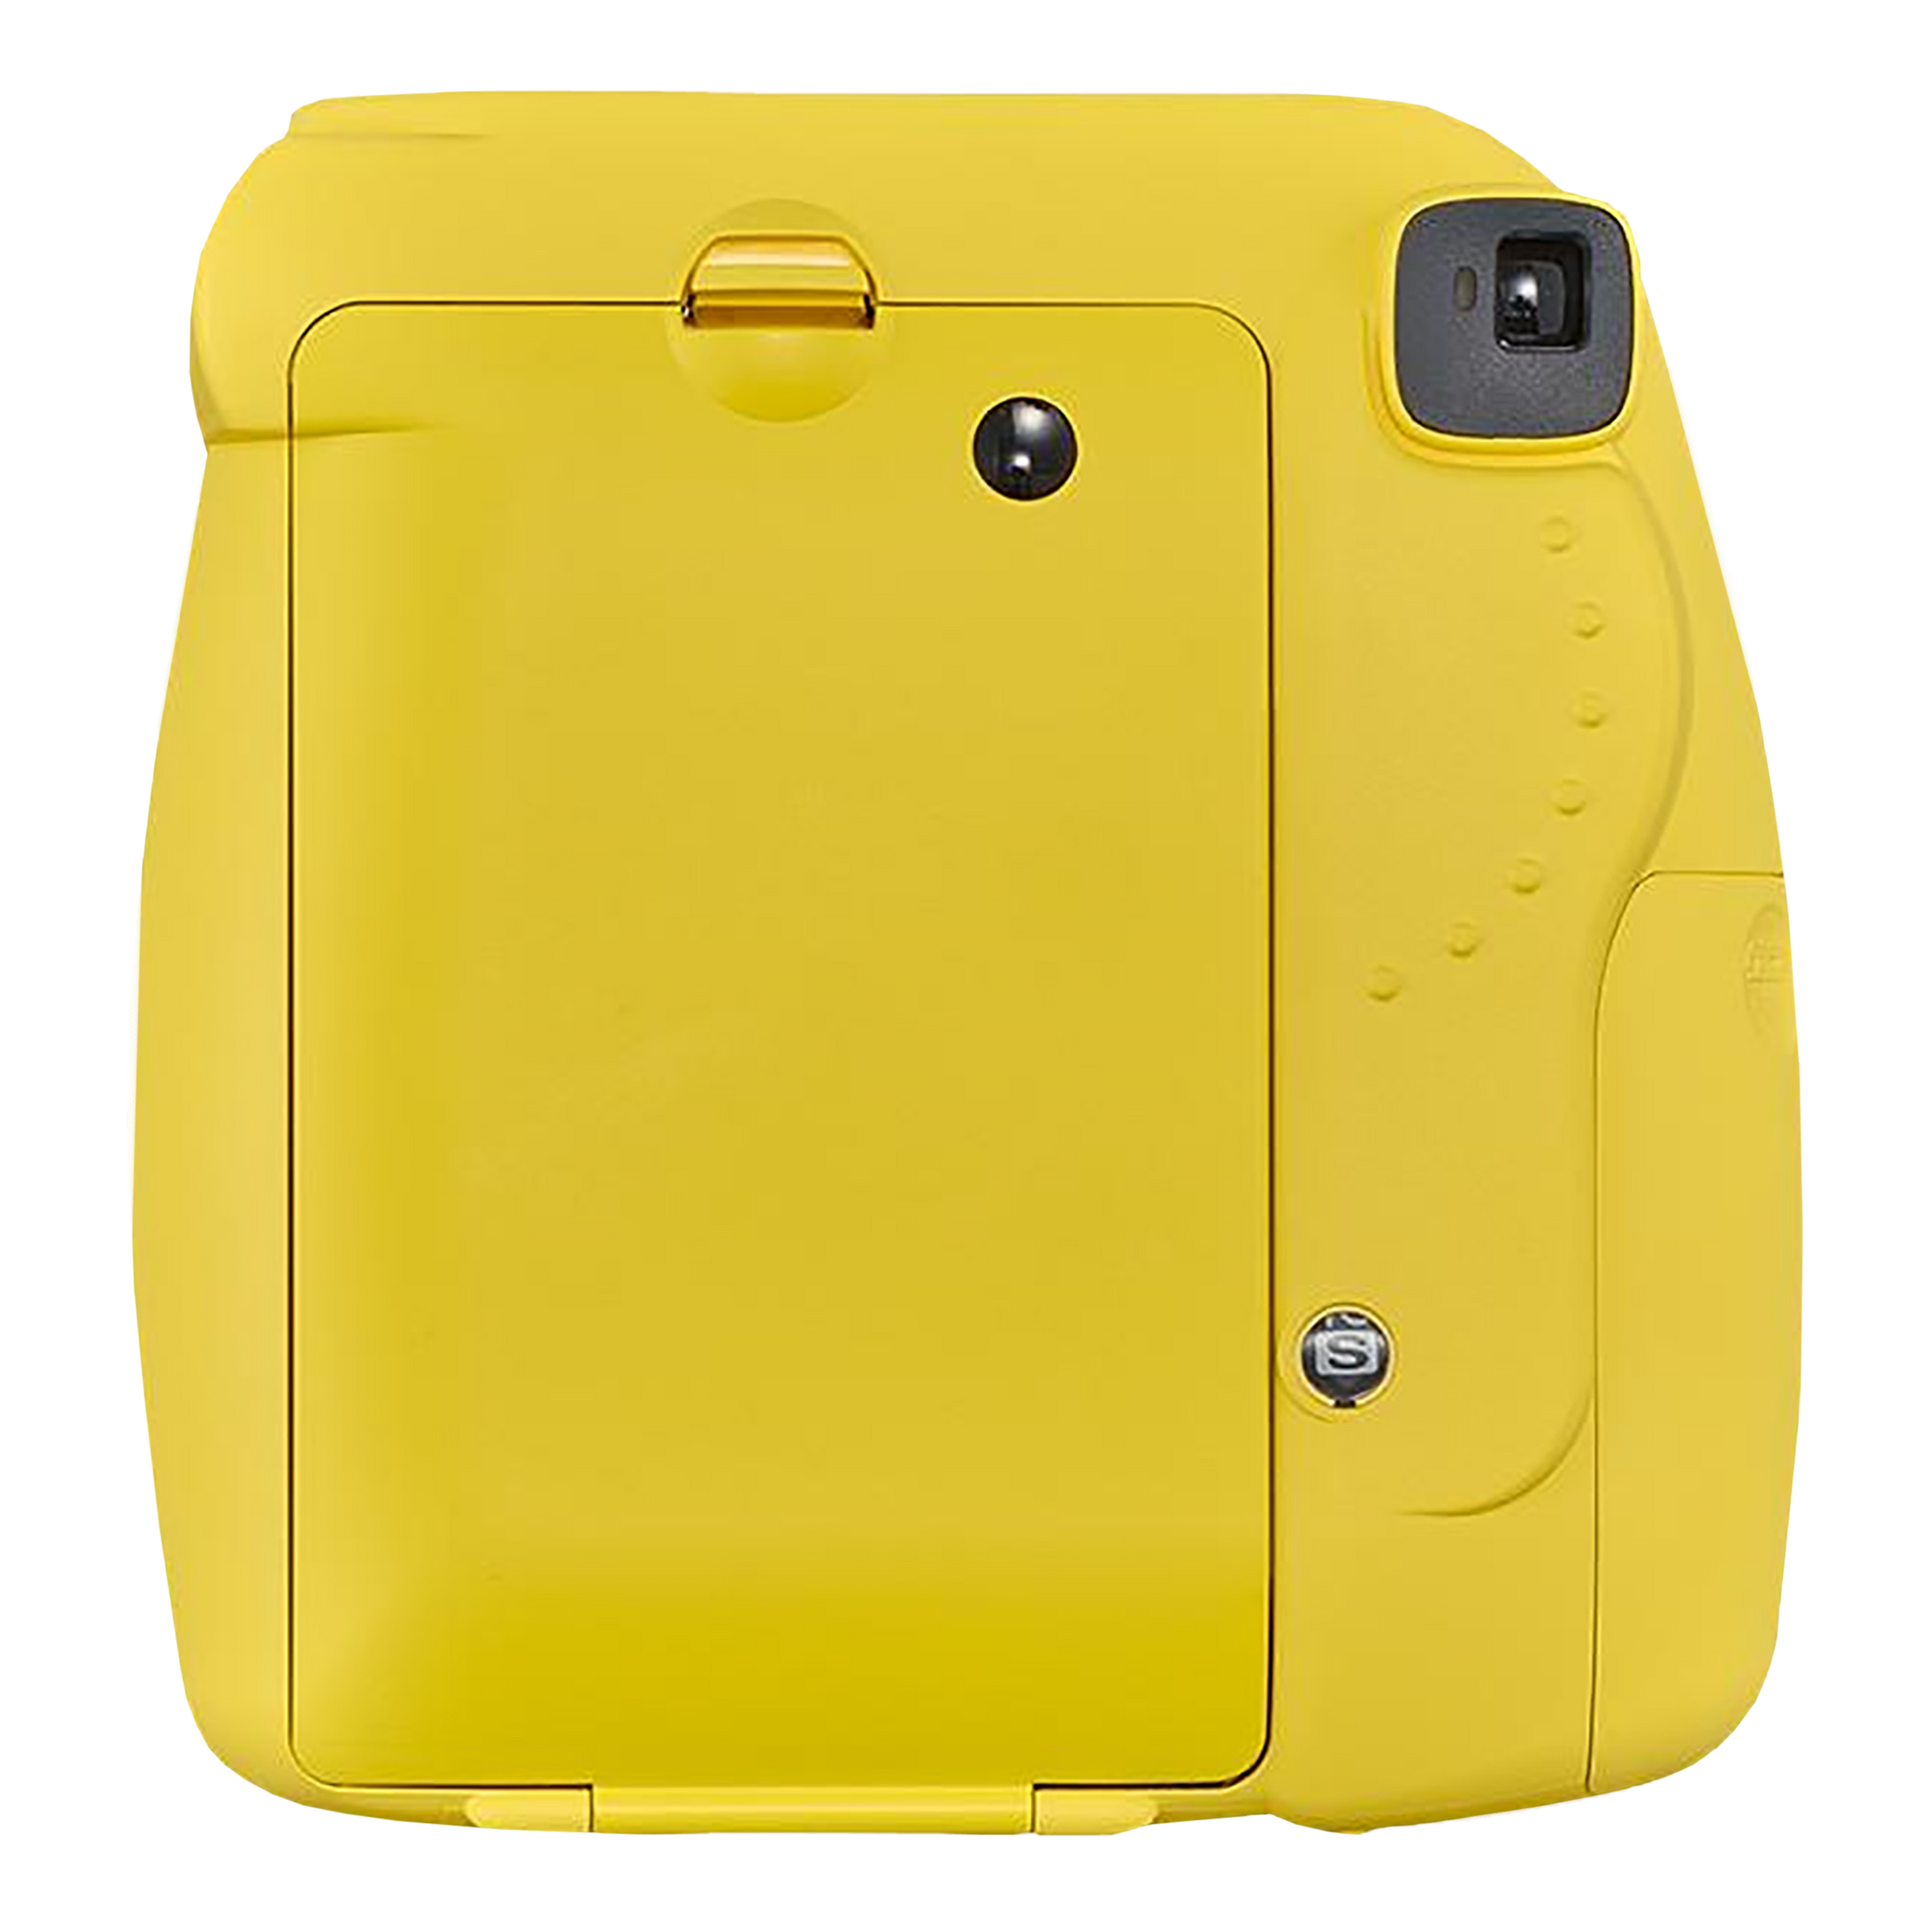 Fujifilm instax mini 9 Instant Film Camera with Clear Accents, Yellow  16632972